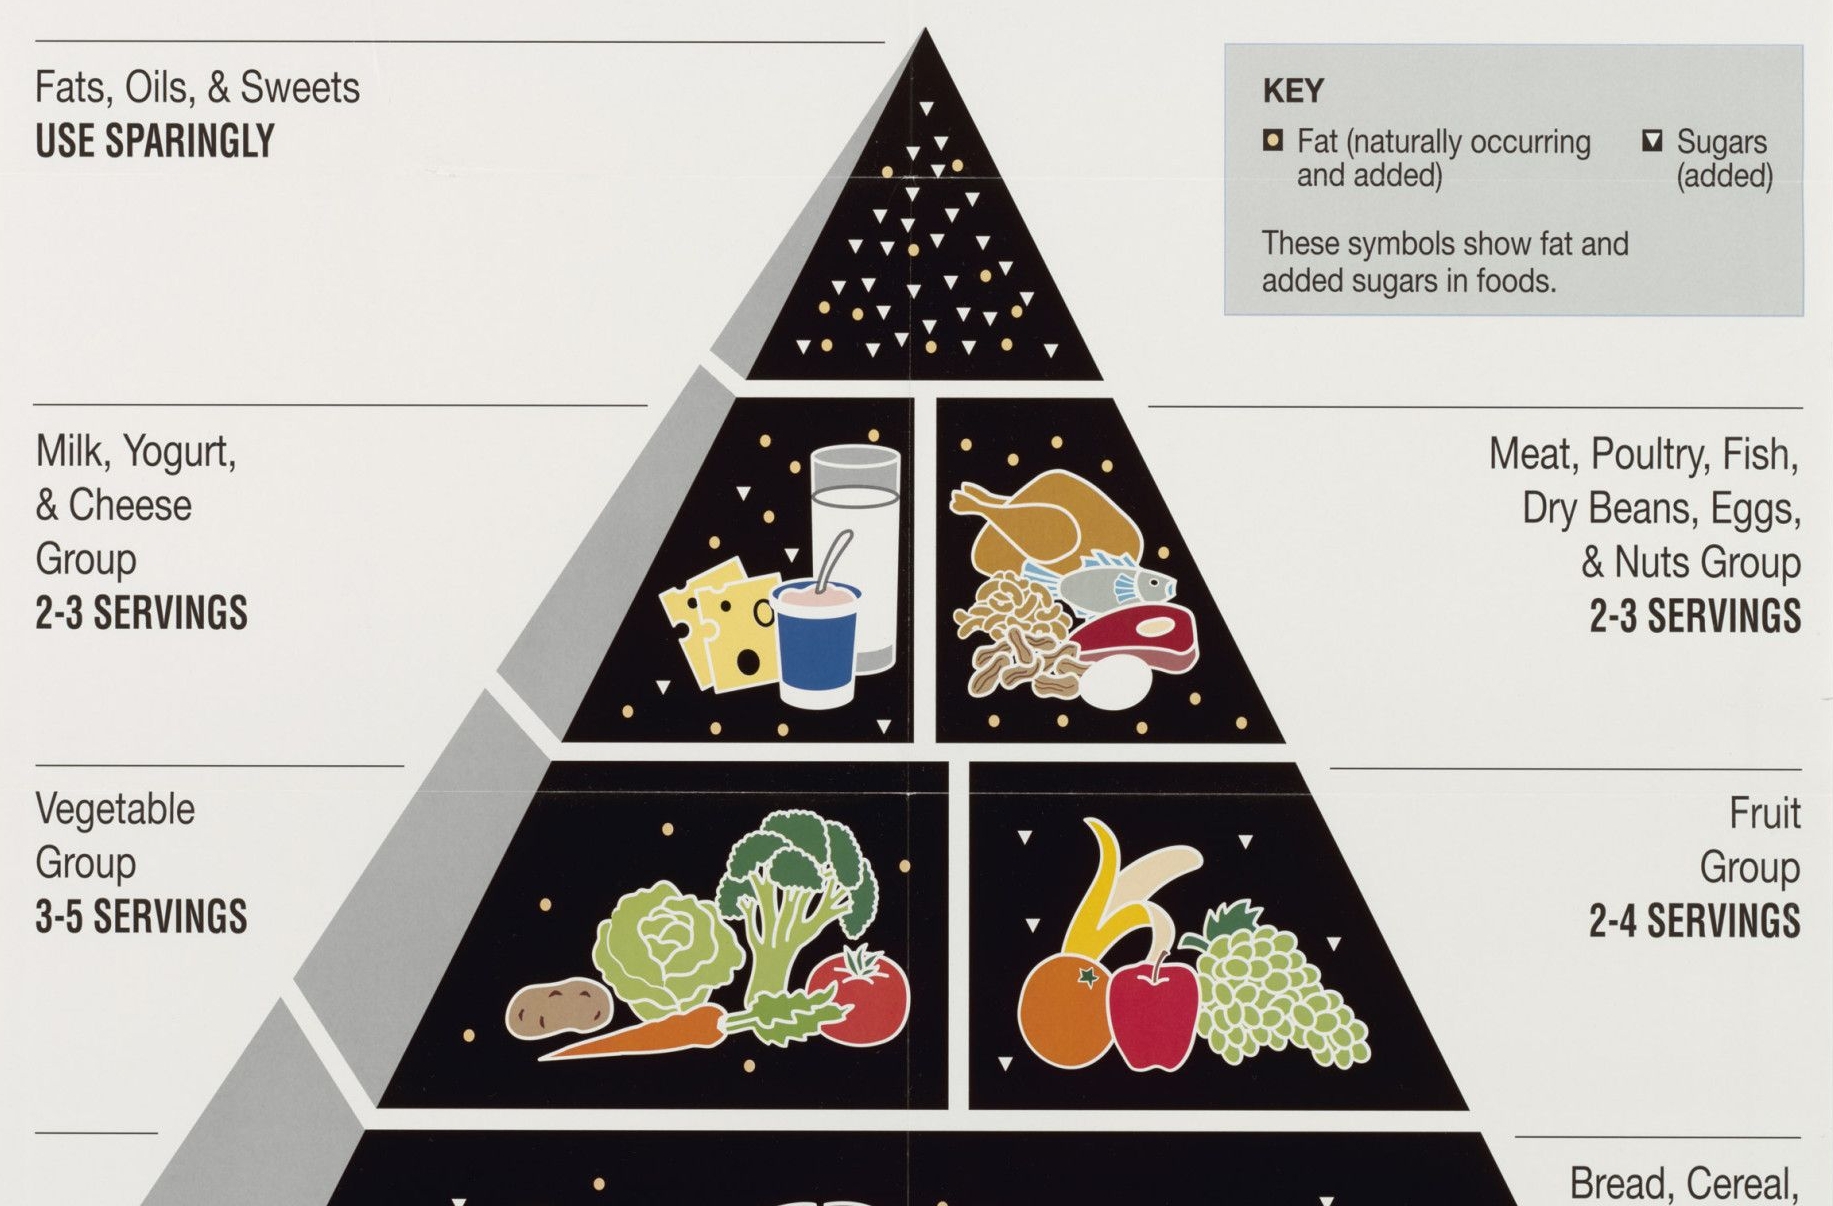 Food Guide Pyramid: A Guide to Daily Food Choices